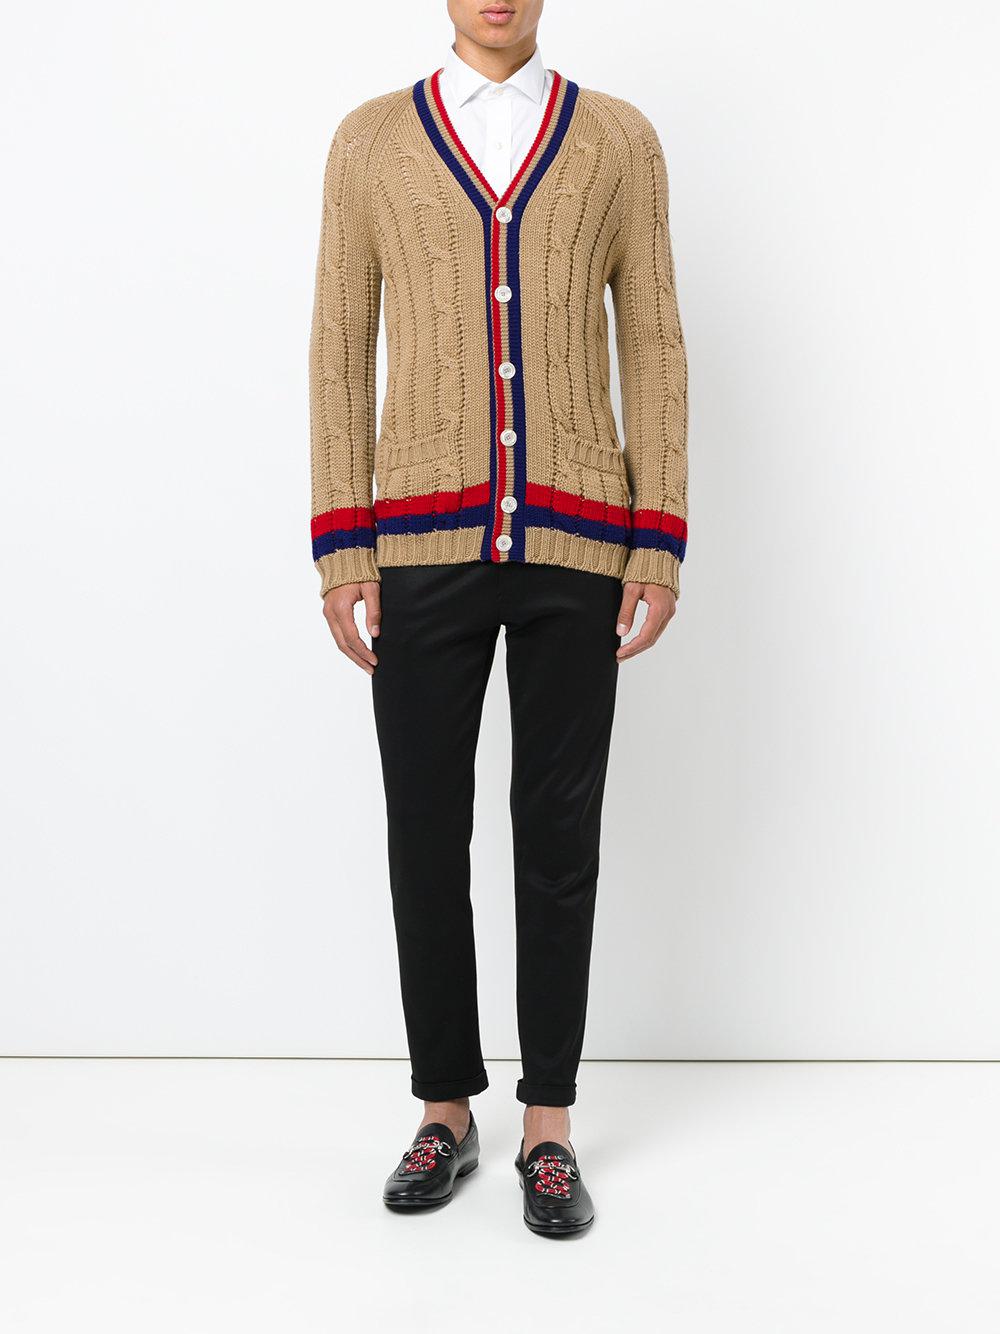 Lyst - Gucci Cable Knit Cardigan in Brown for Men